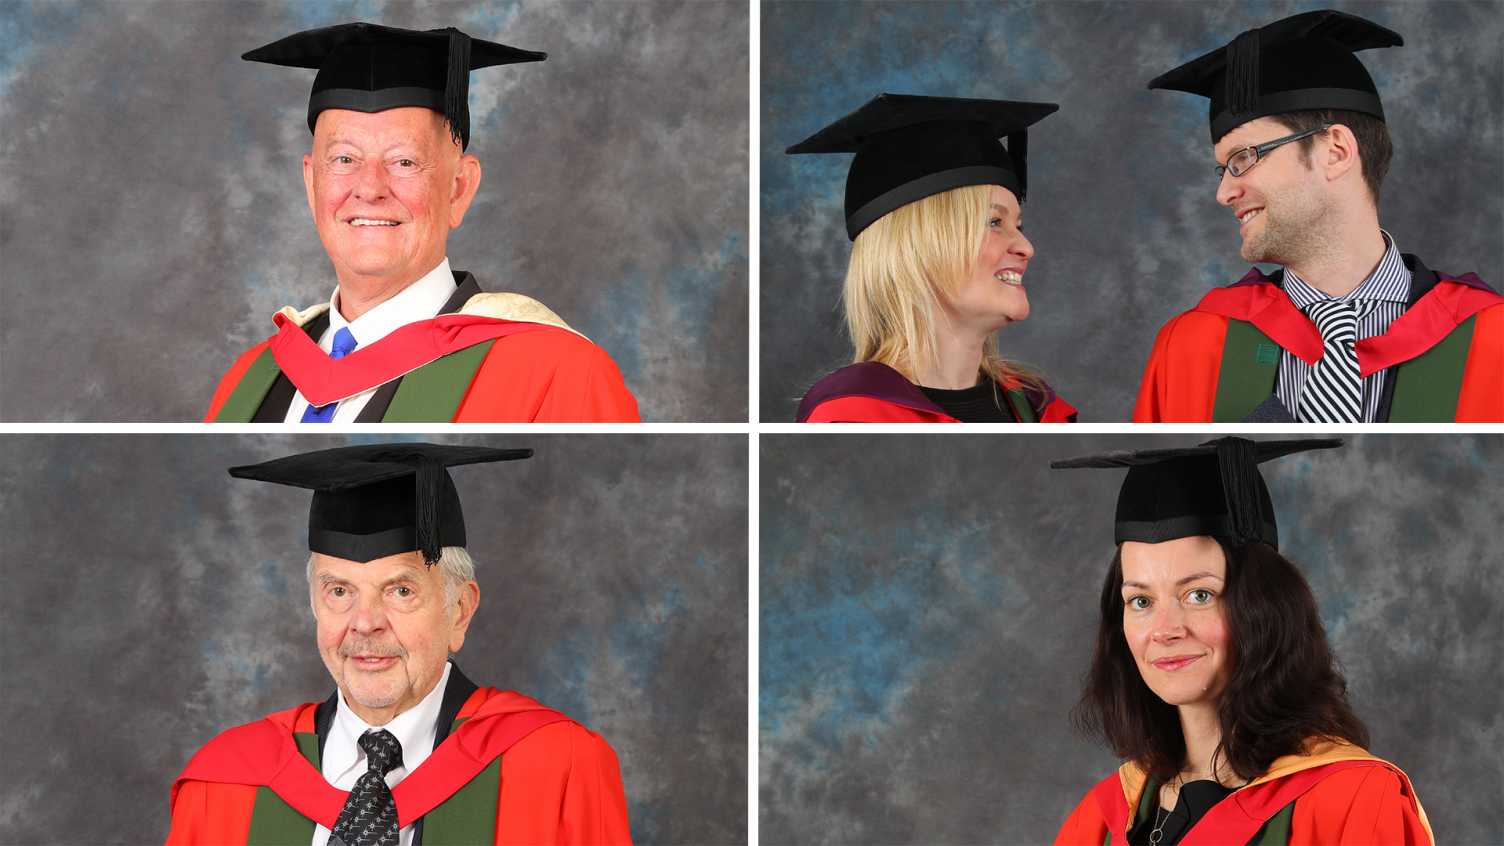 University of Sheffield students could receive empty certificates at  graduation